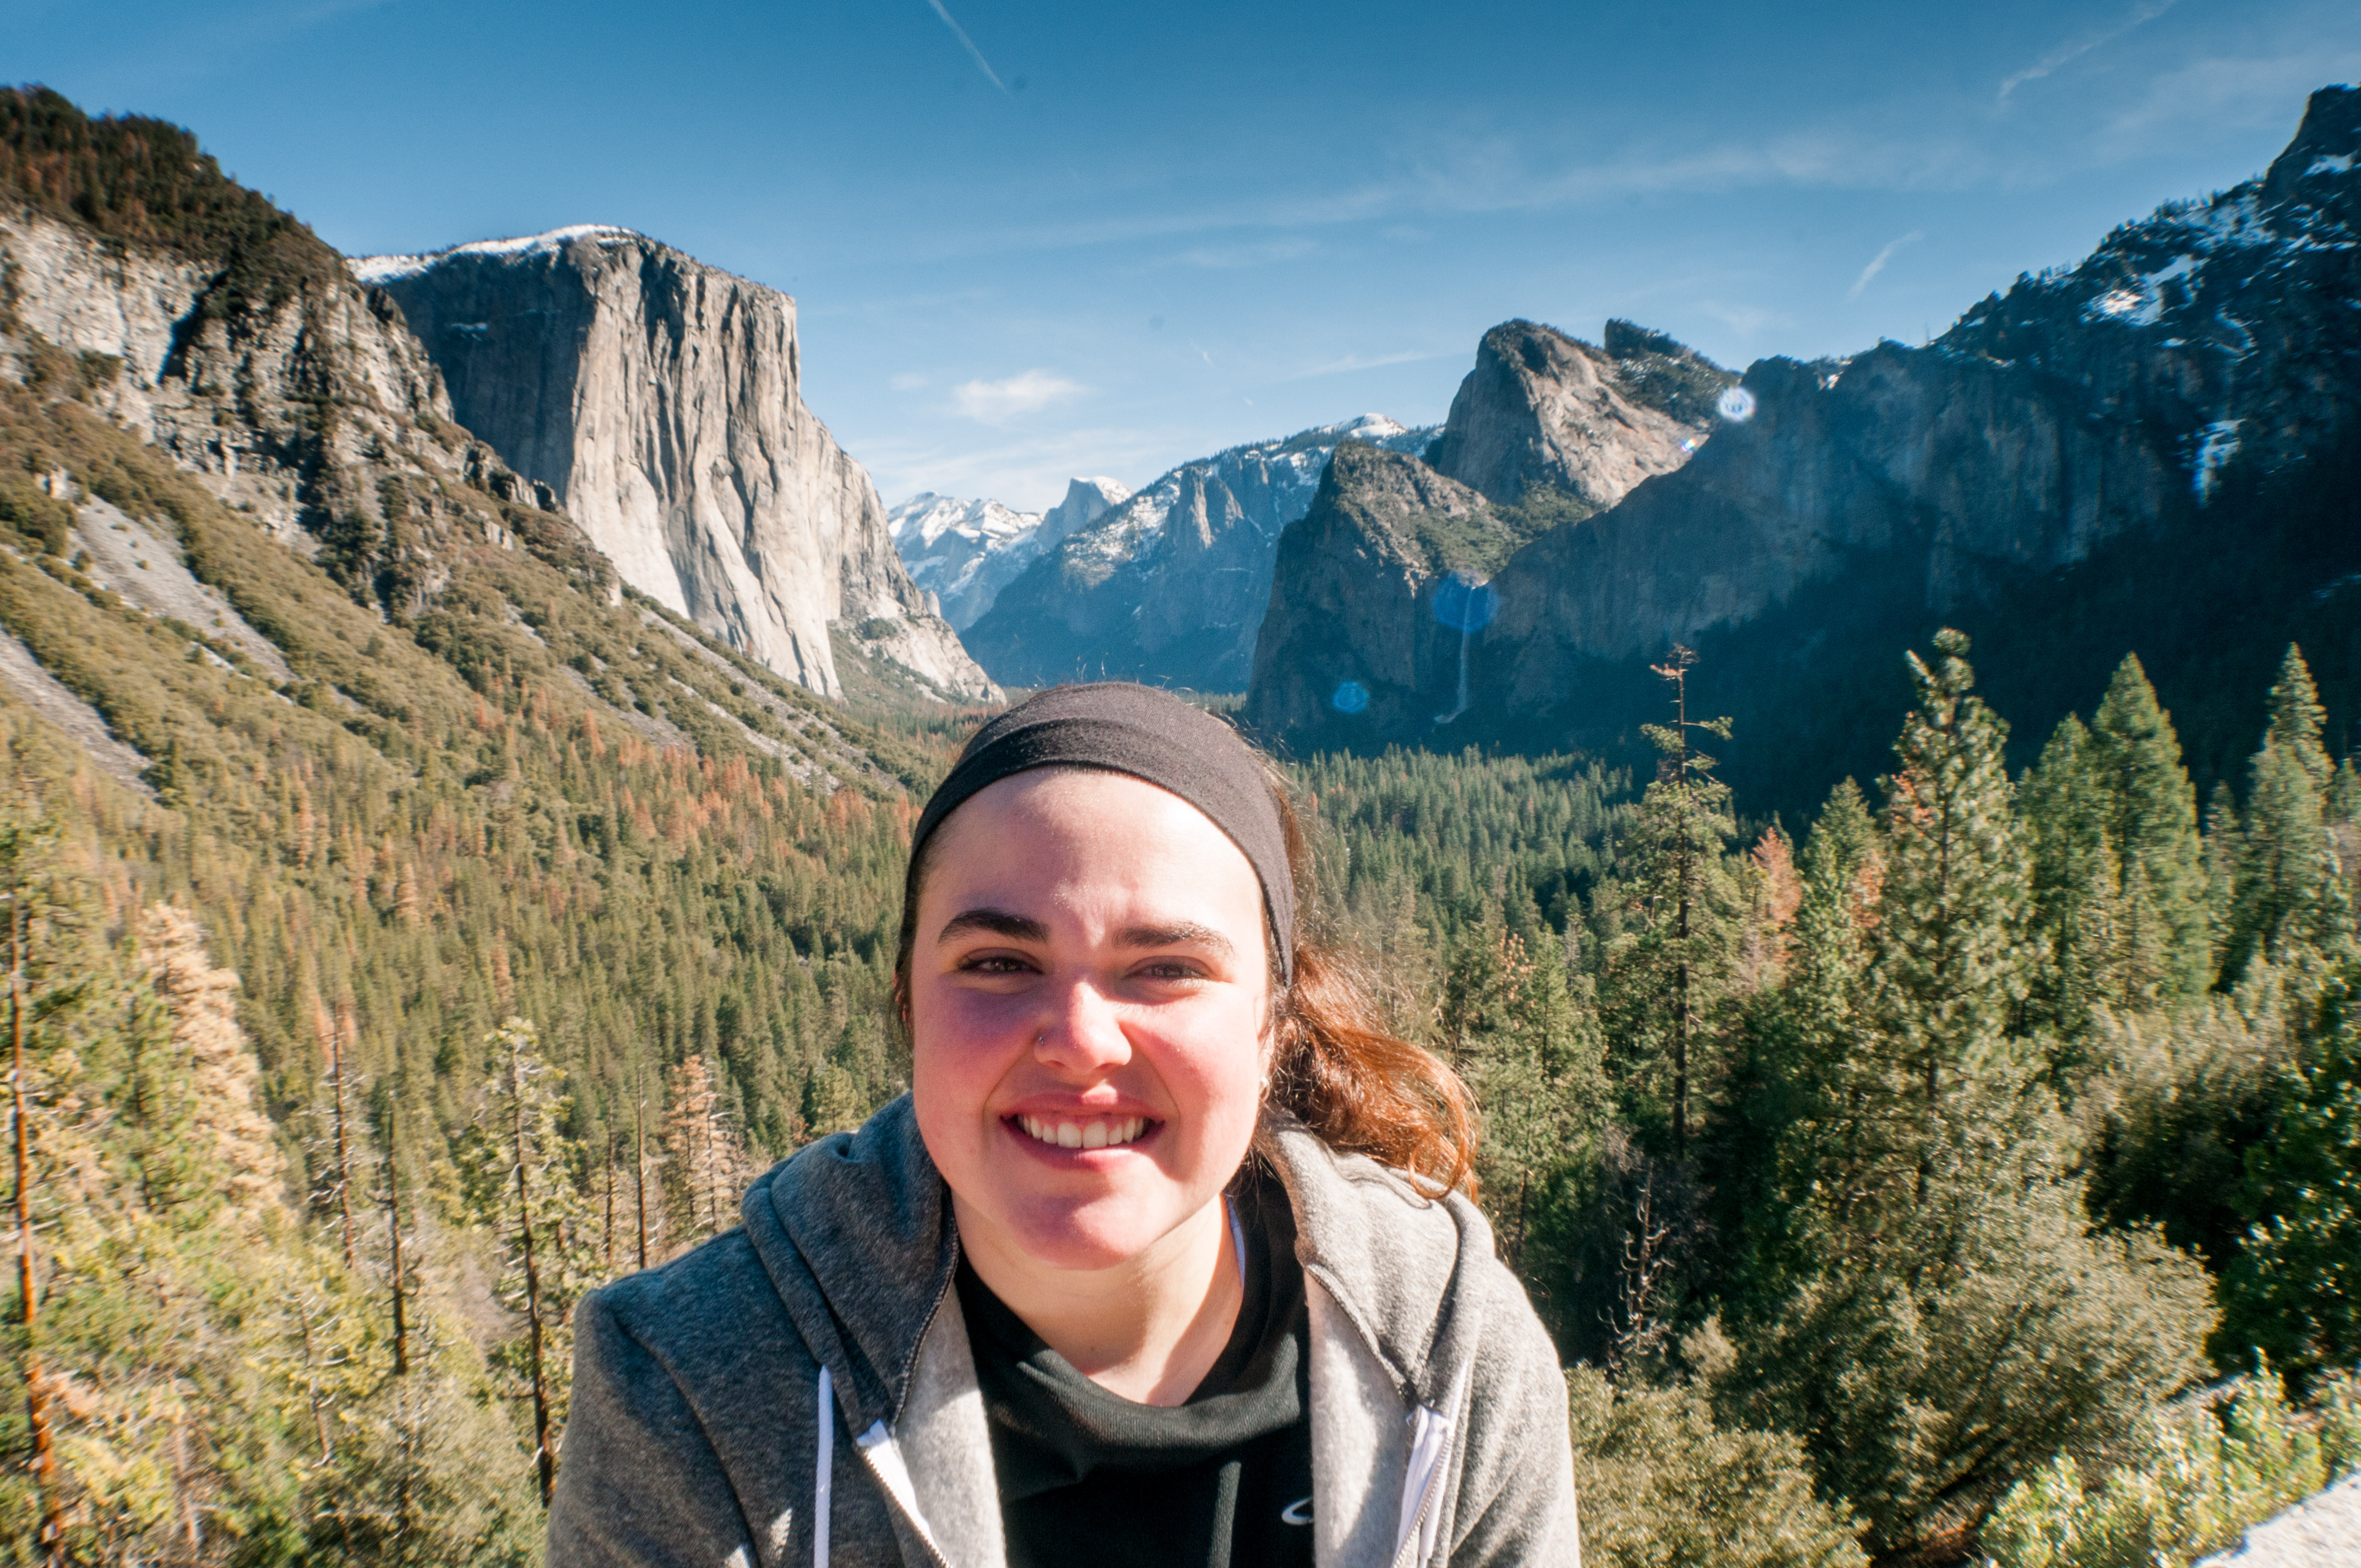 Kelly Blick on a sunny day in Yosemite Valley in California in the United States.  Posing in front of Yosemite Valley as seen from Tunnel View Look Out Point.  